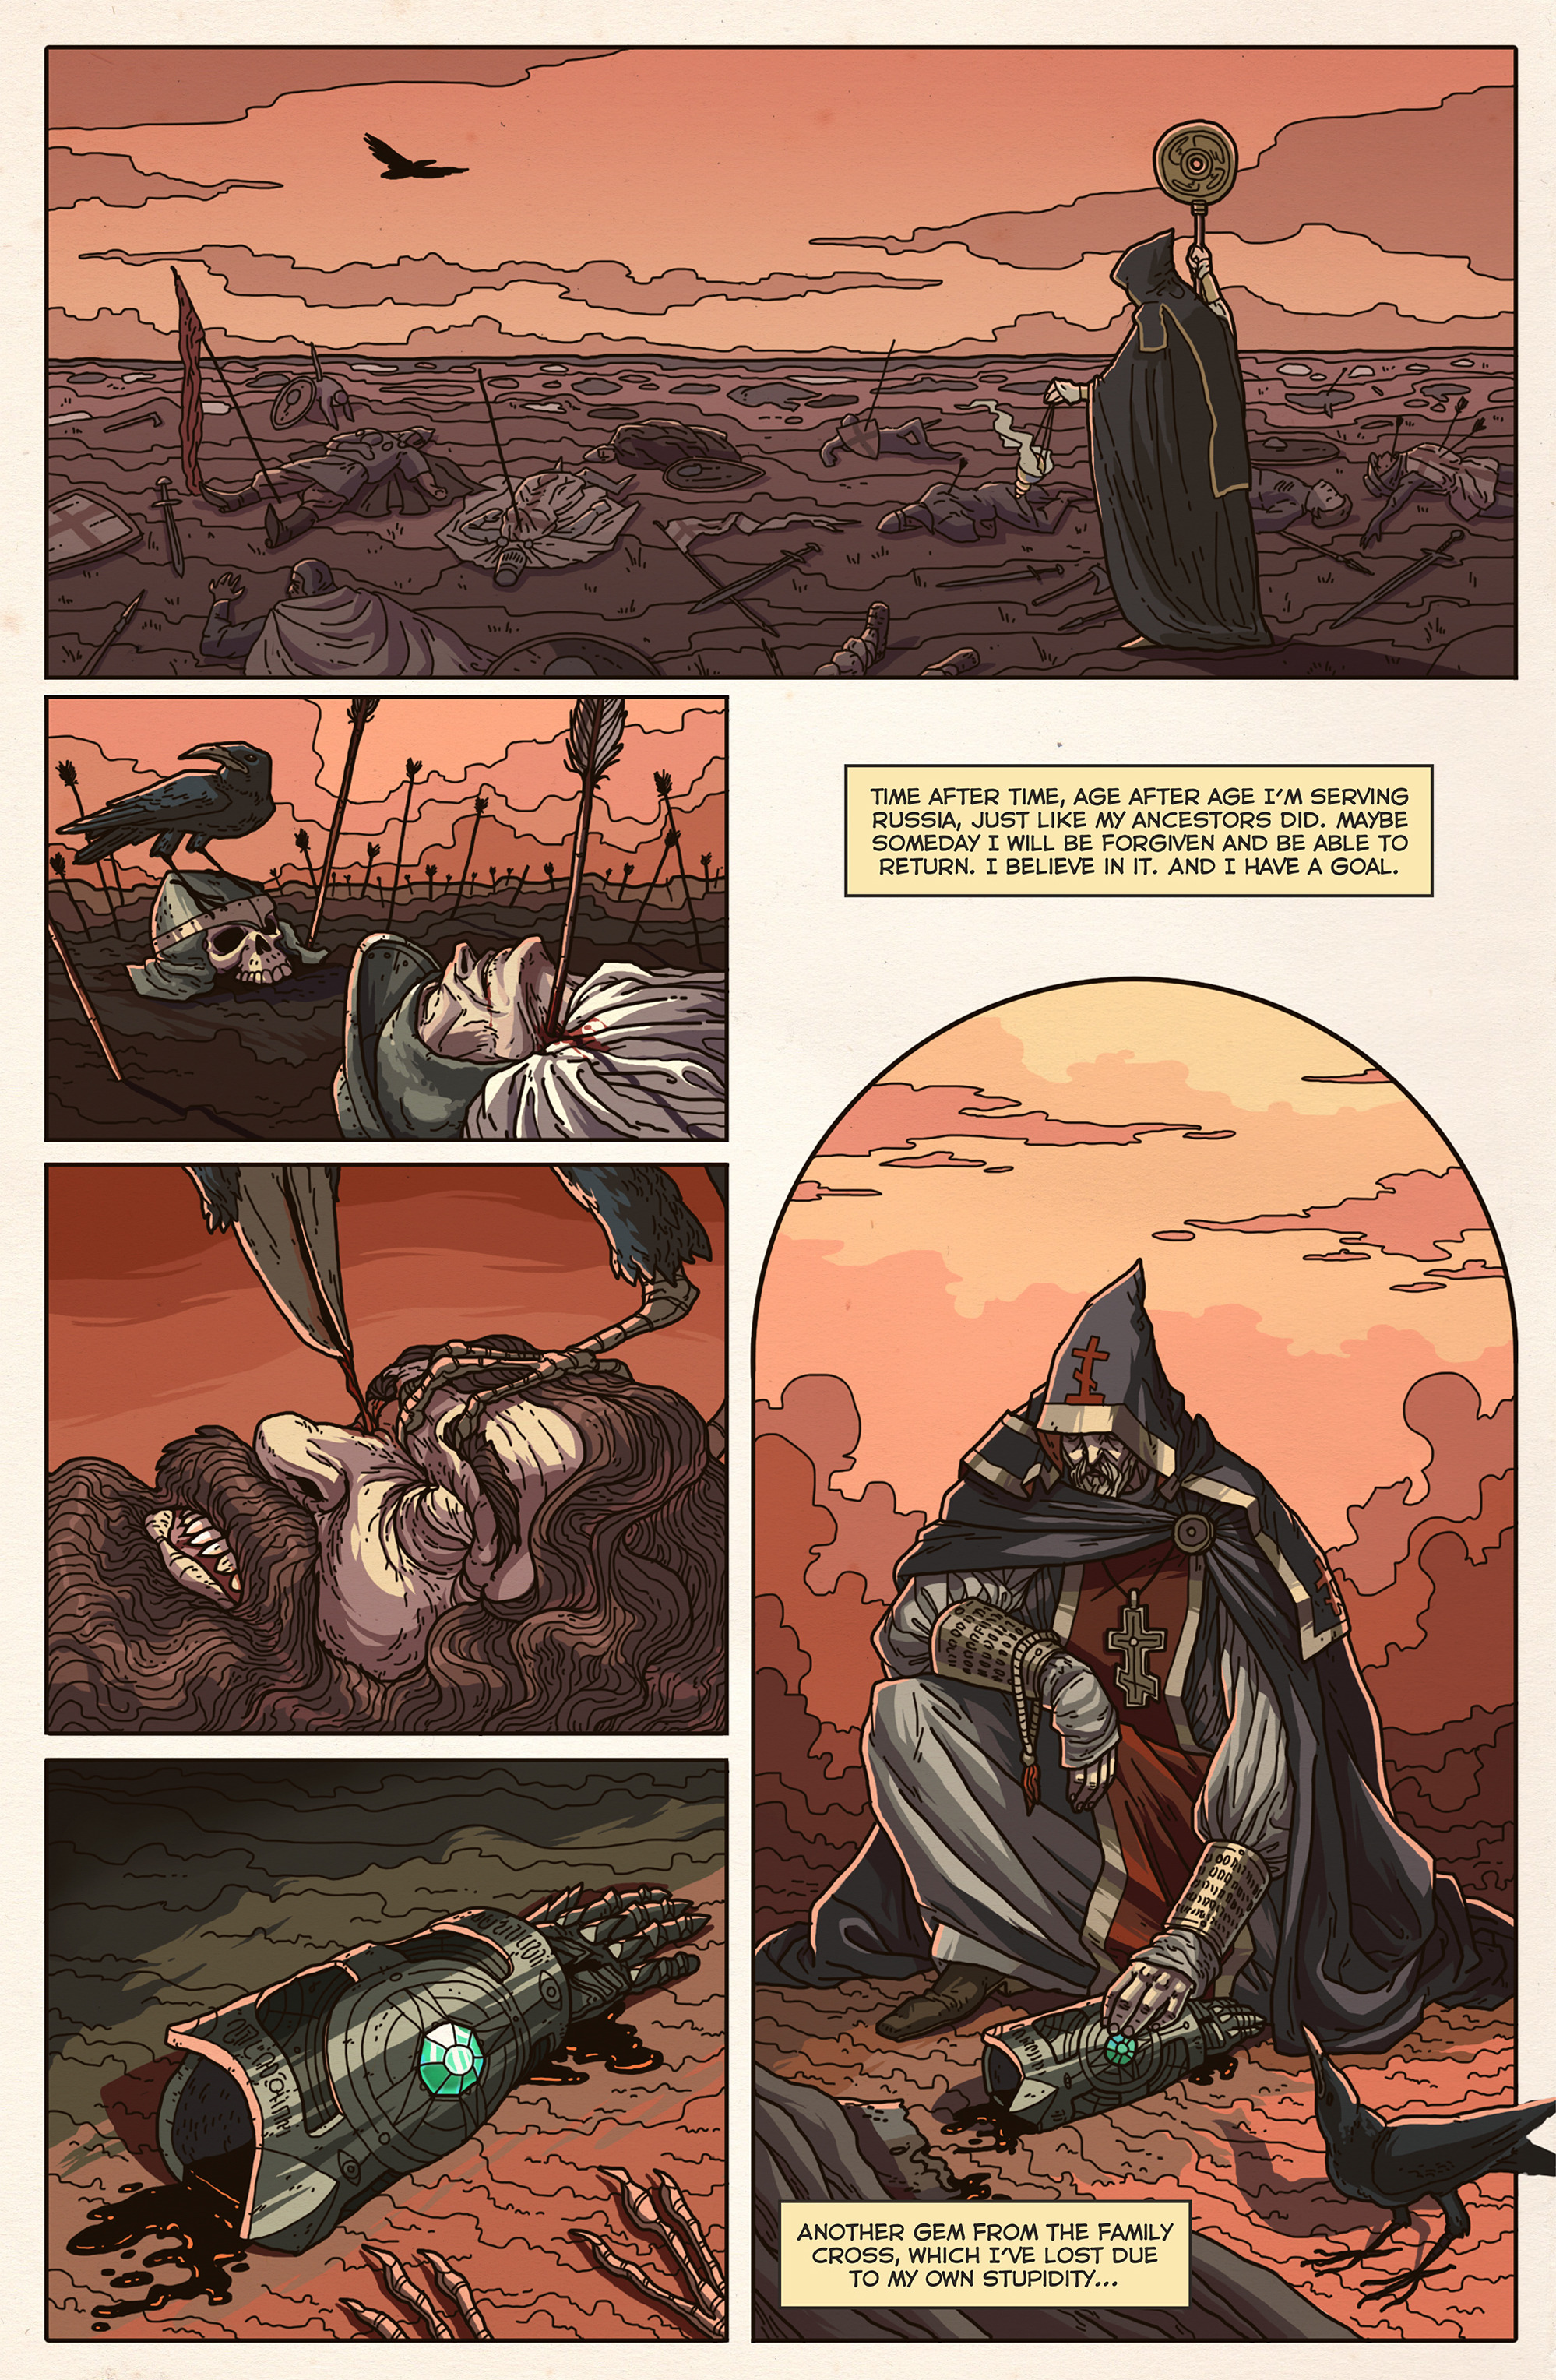 Read online Friar comic -  Issue #1 - 11